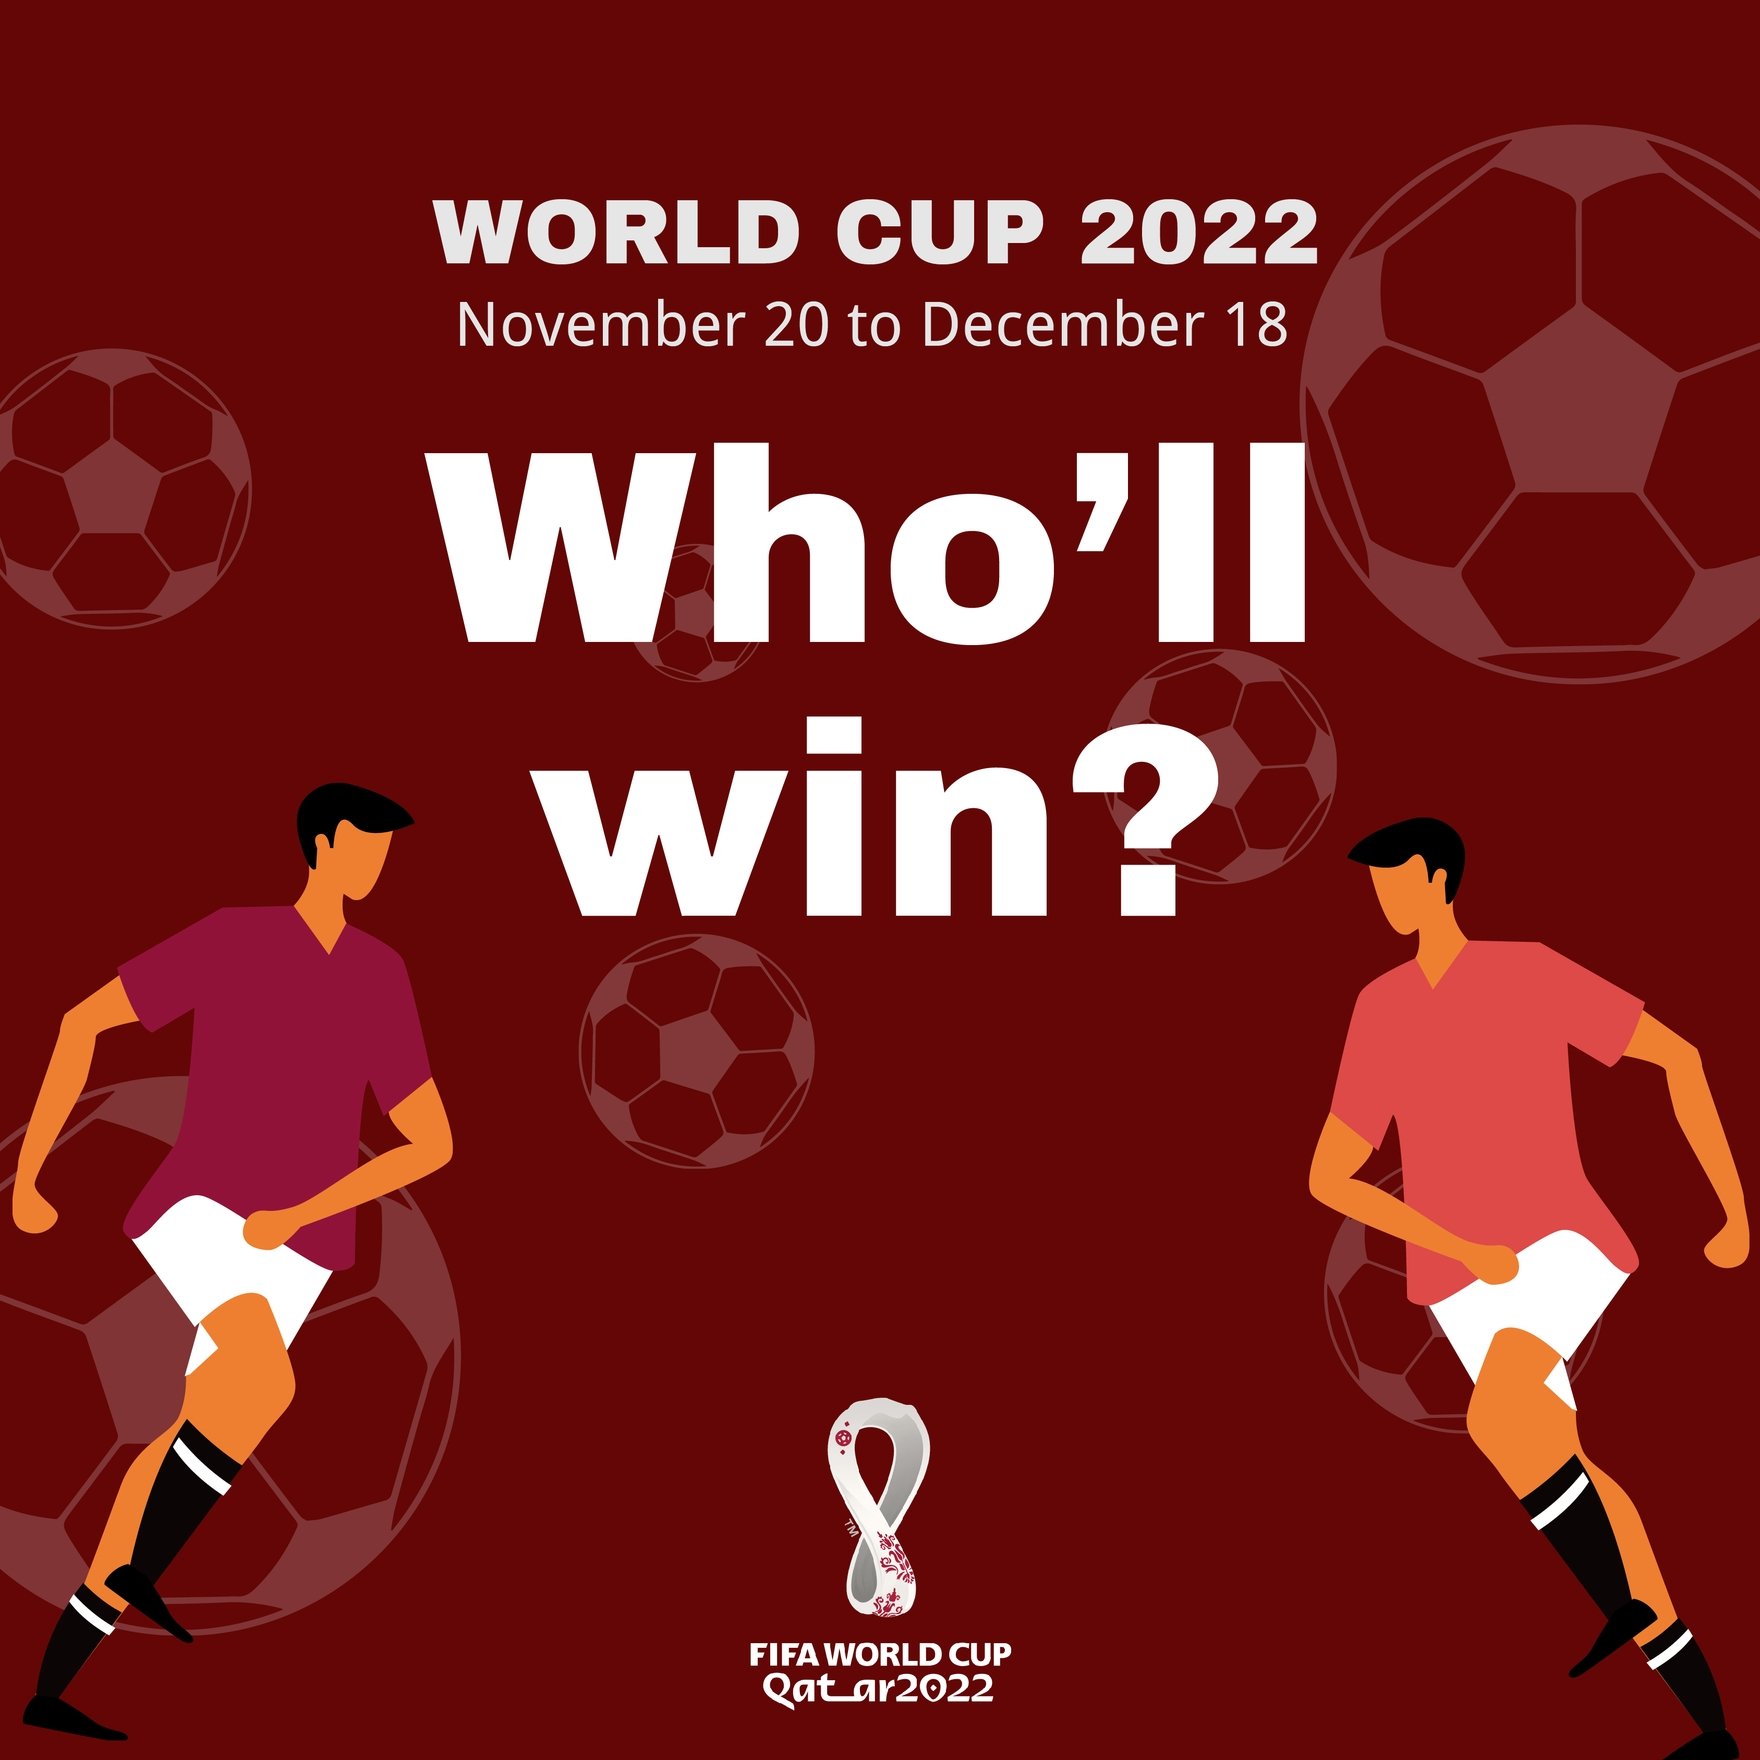 World Cup 2022 Facebook Ad Banner